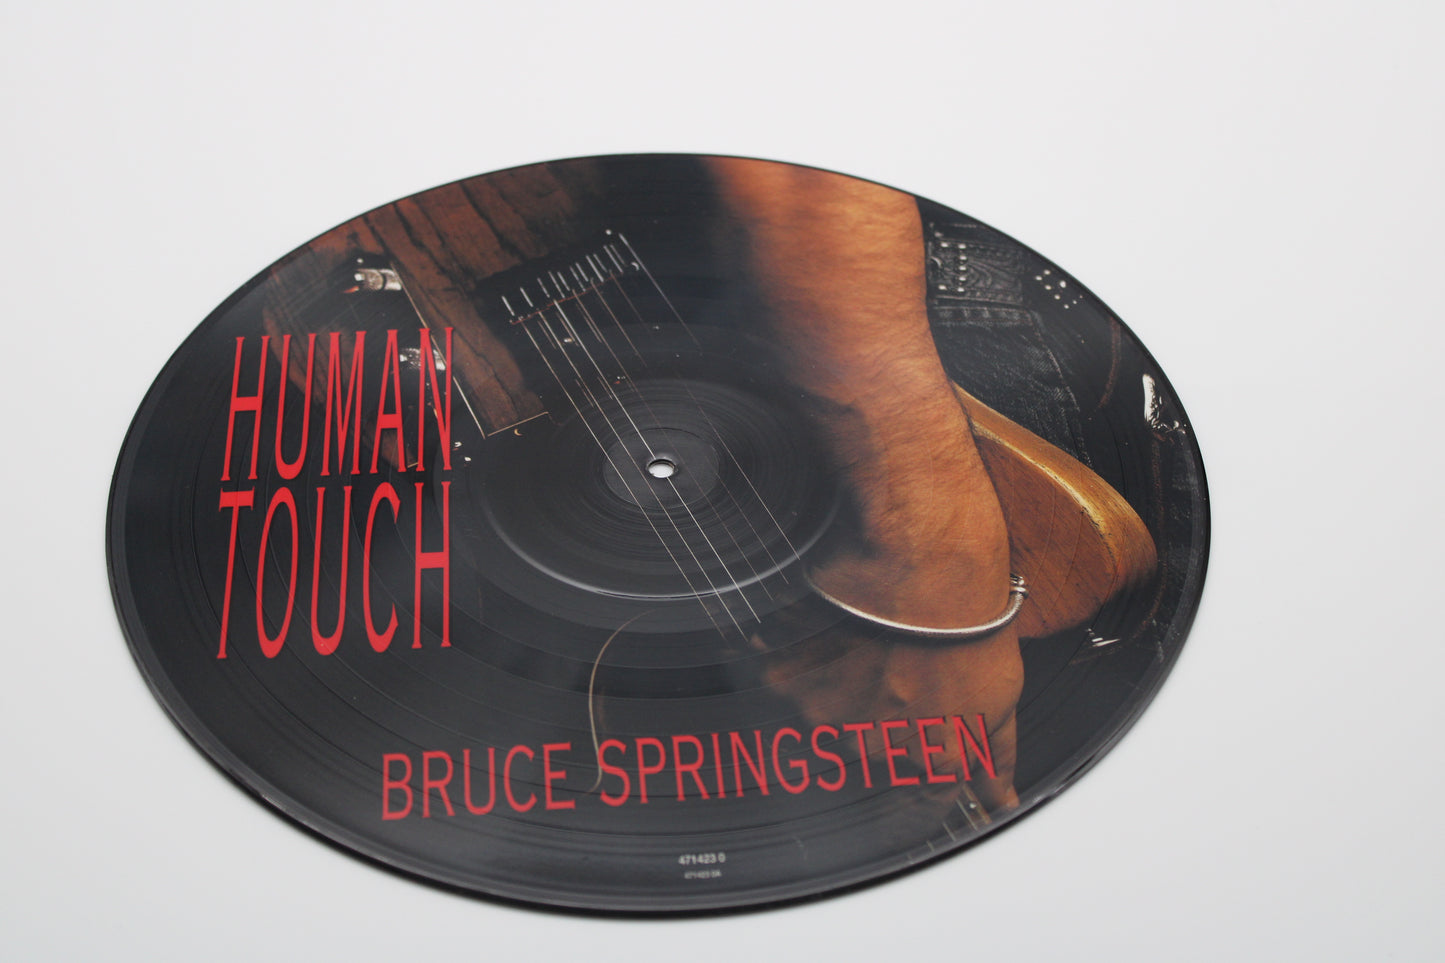 Bruce Springsteen Human Touch LP Album on 12” Picture Disc Collectible Vinyl